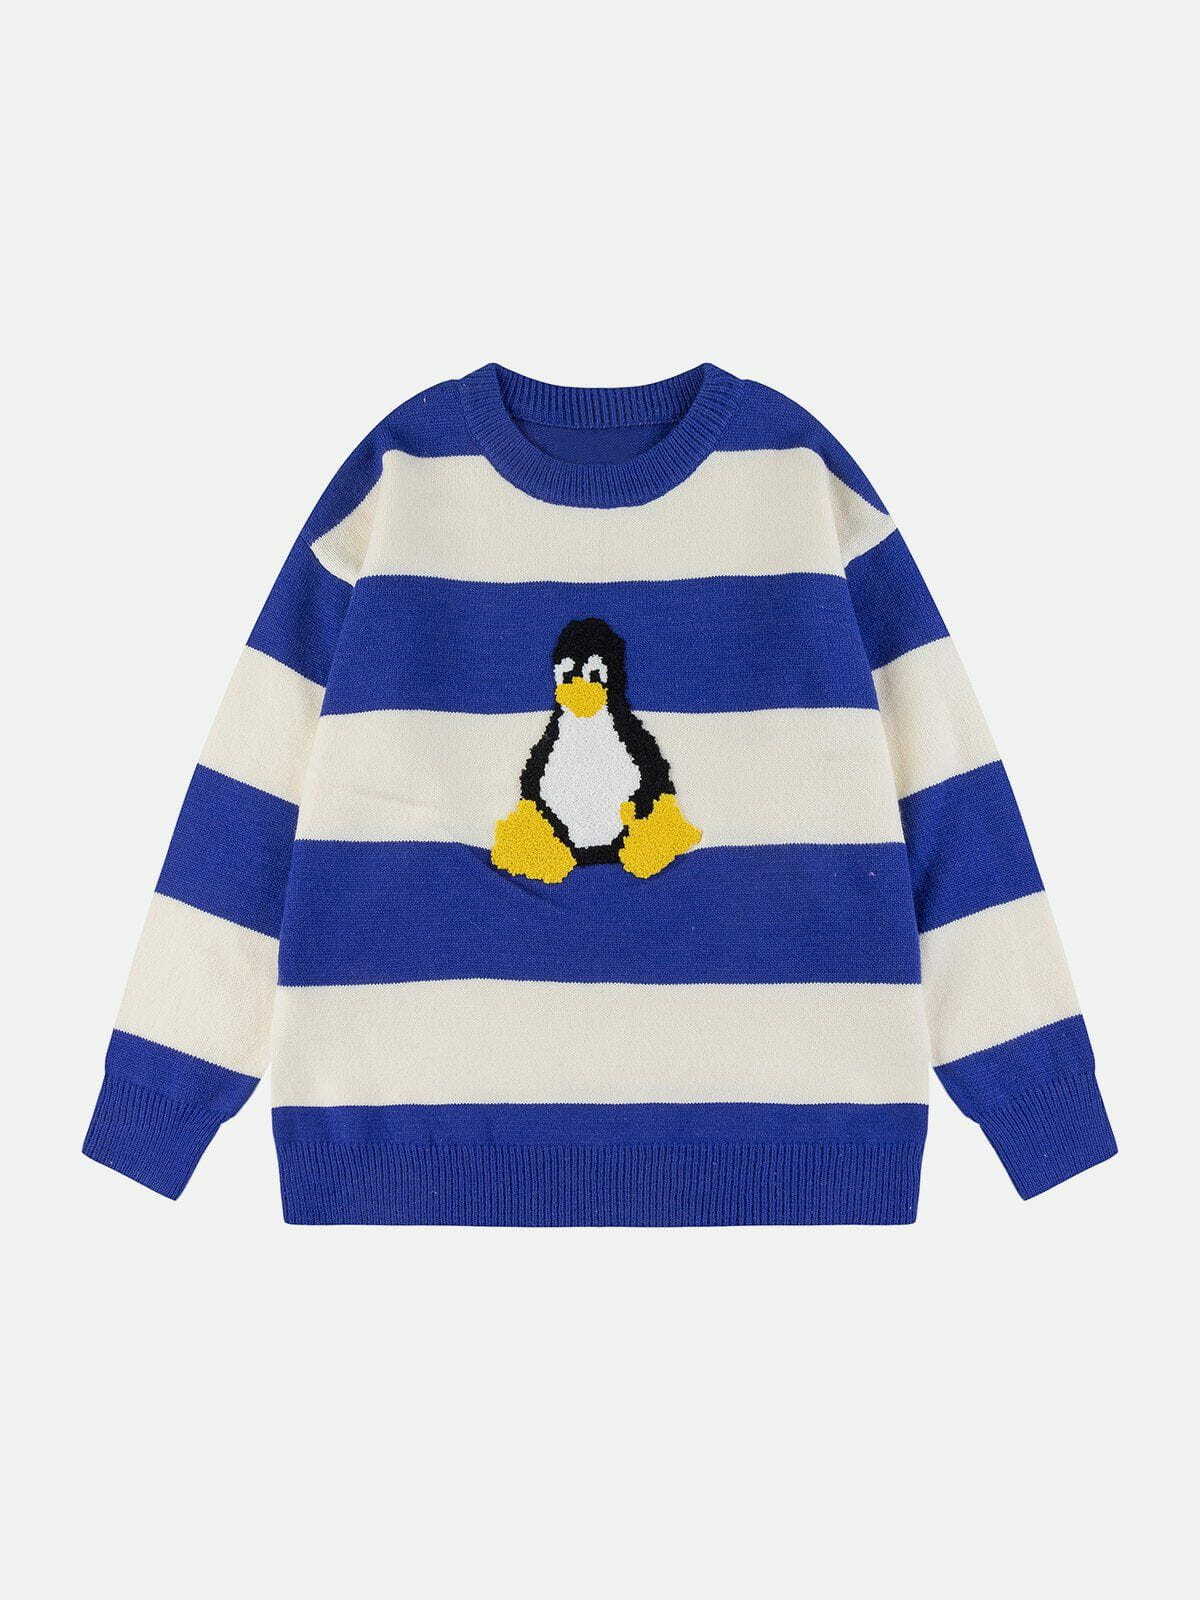 striped urban duck sweater edgy graphic knit 8182